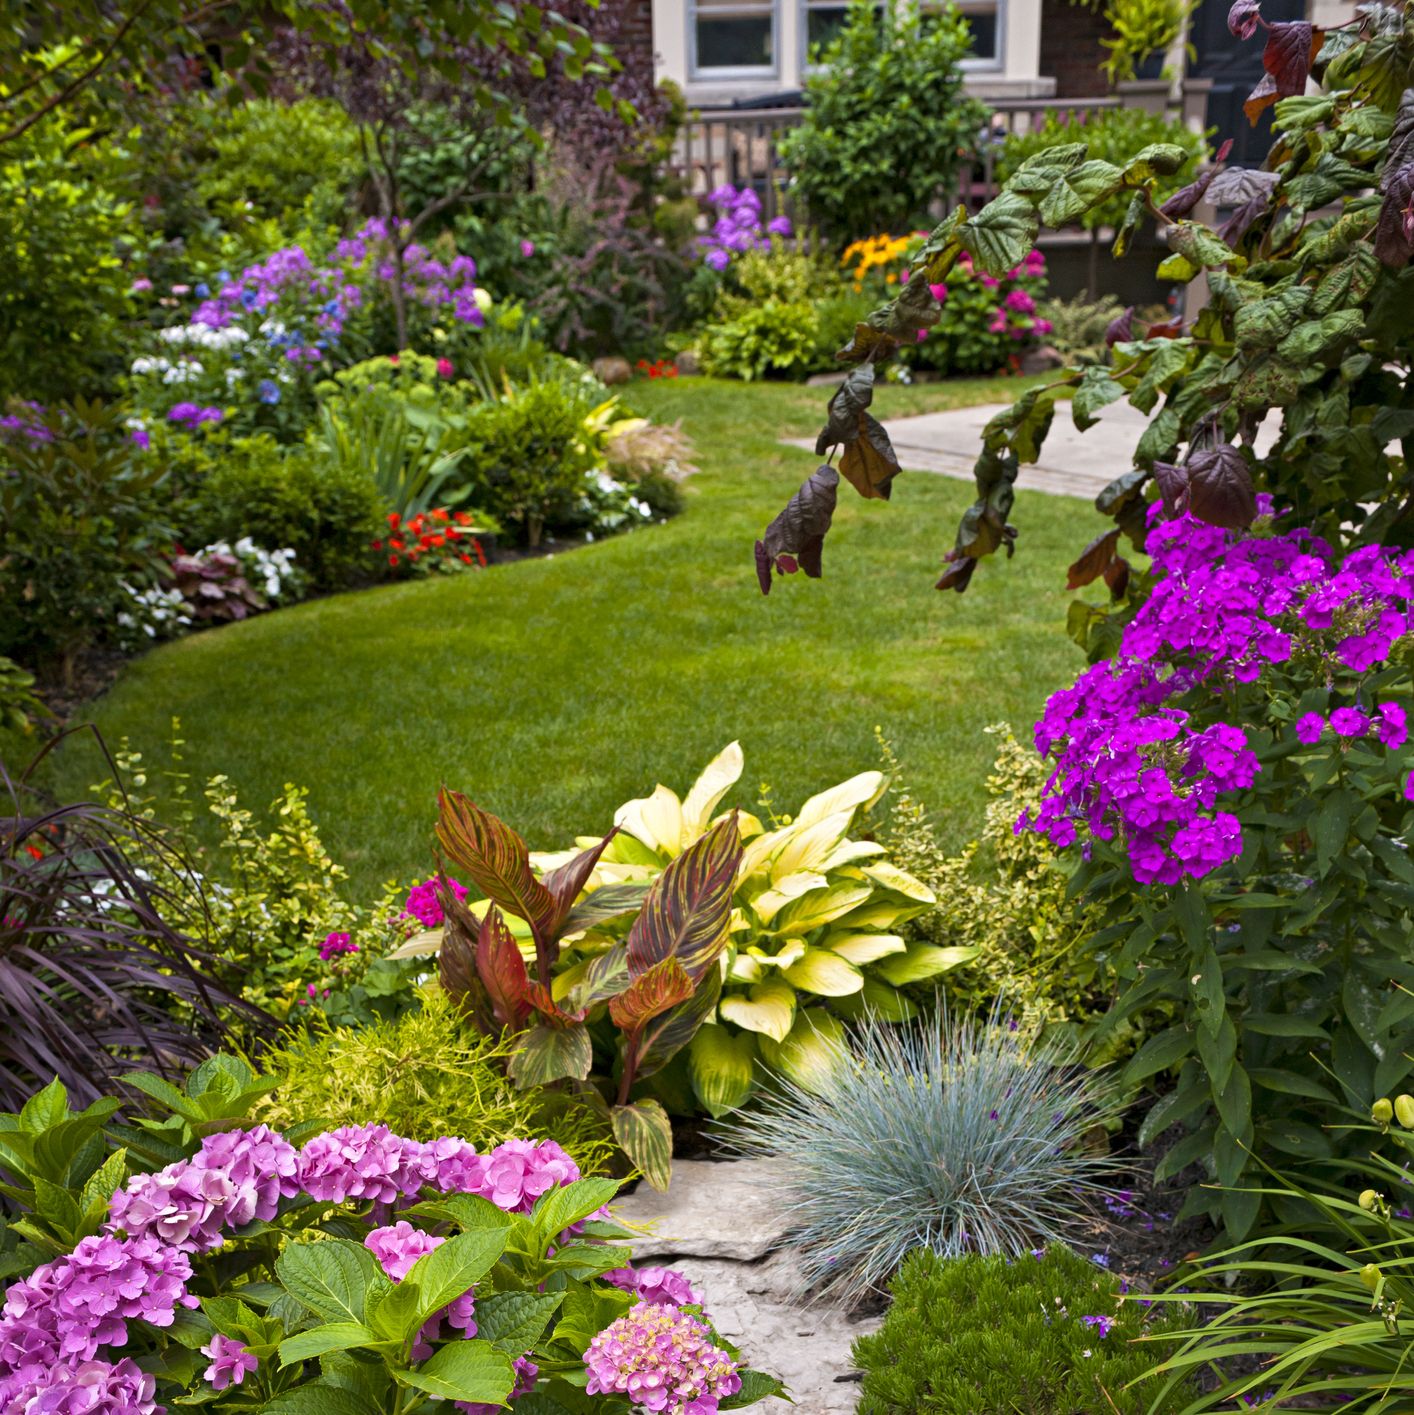 Colorful flowers in a neat garden